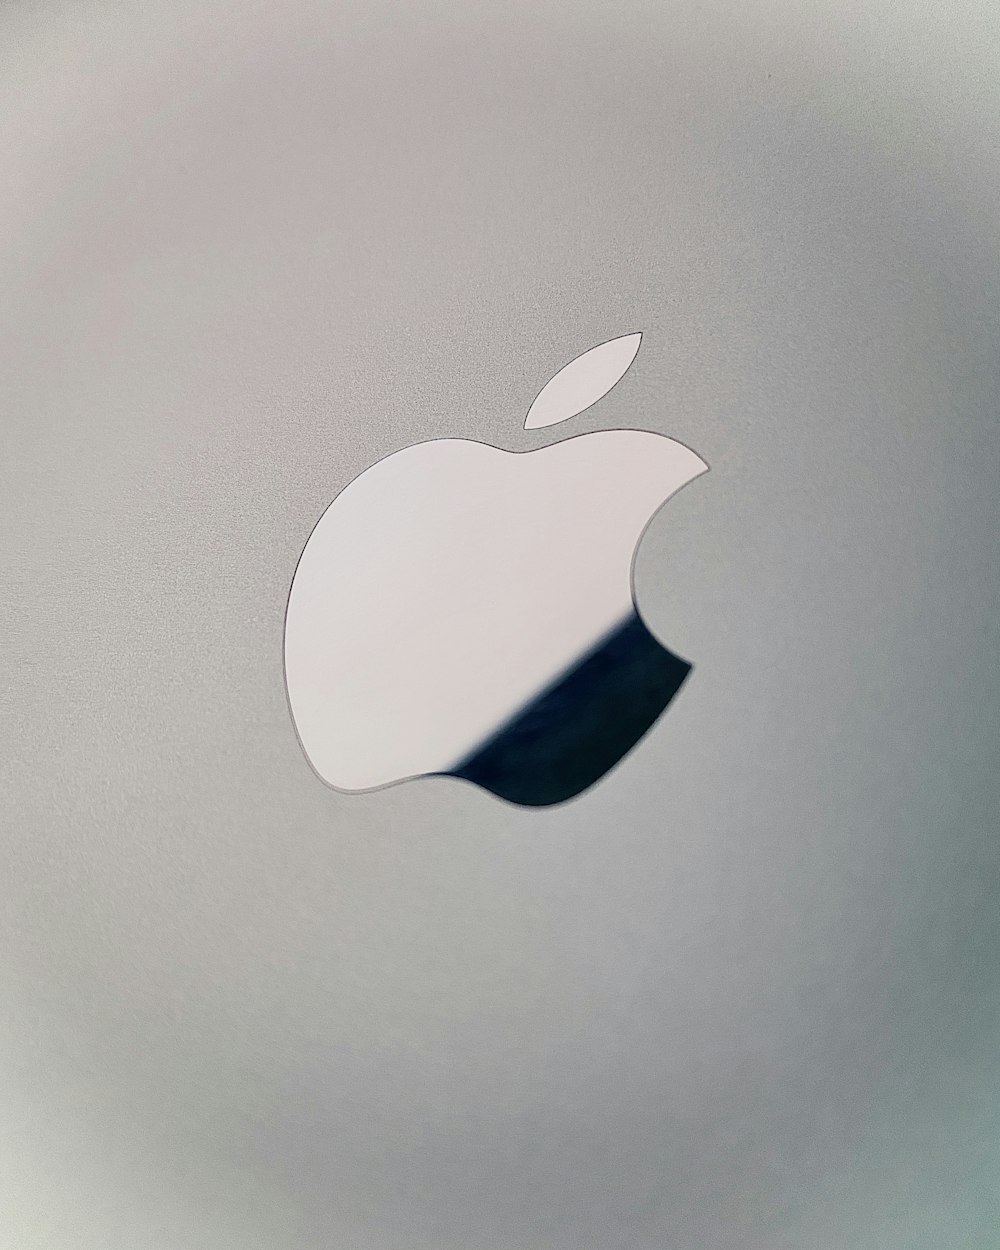 silver apple logo on silver surface